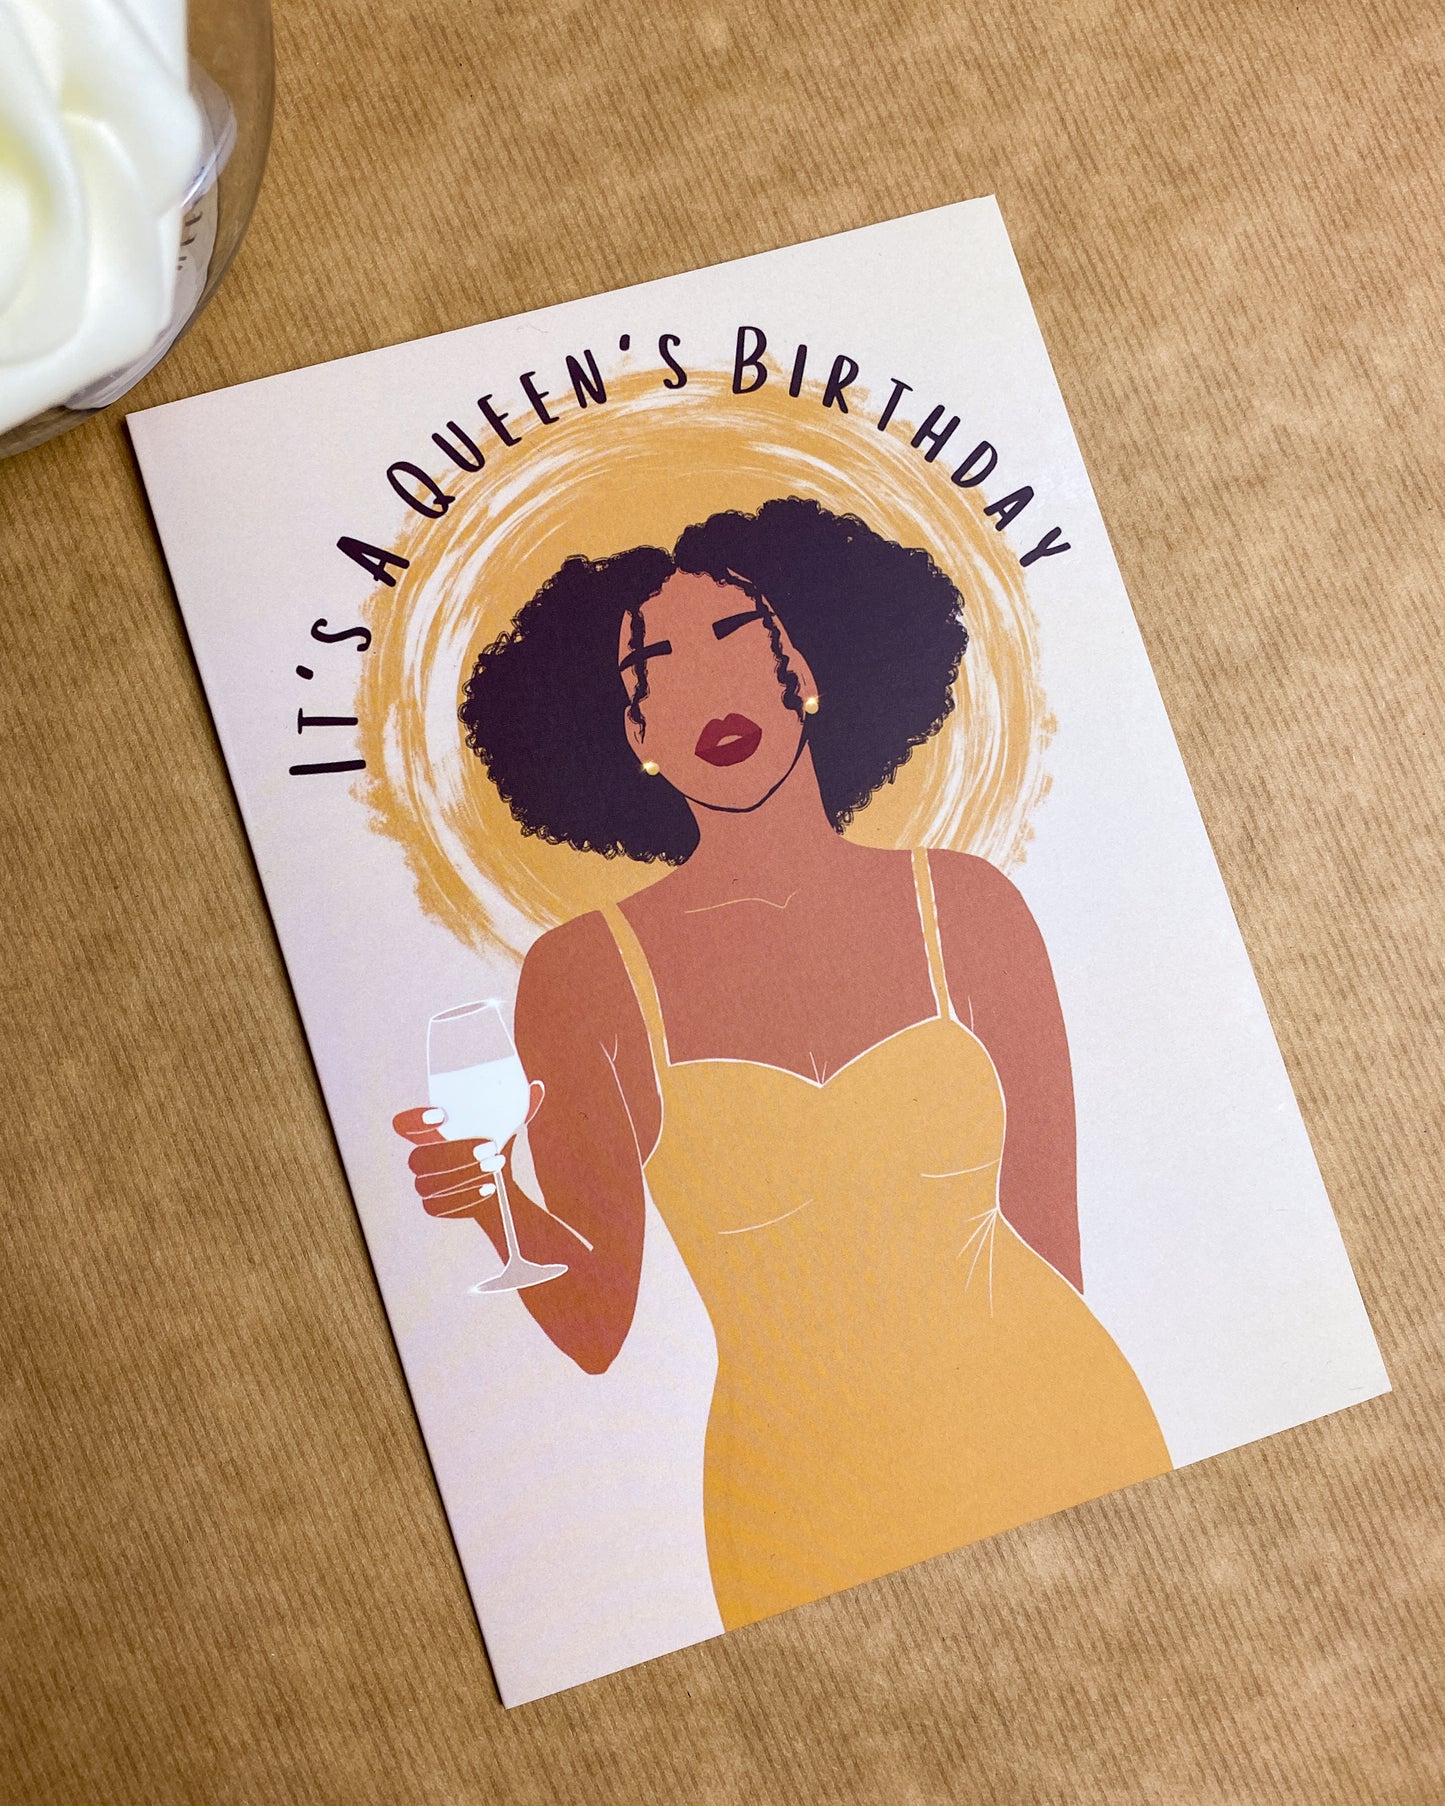 It's A Queens Birthday - Mixed Race / Black Woman Birthday Card